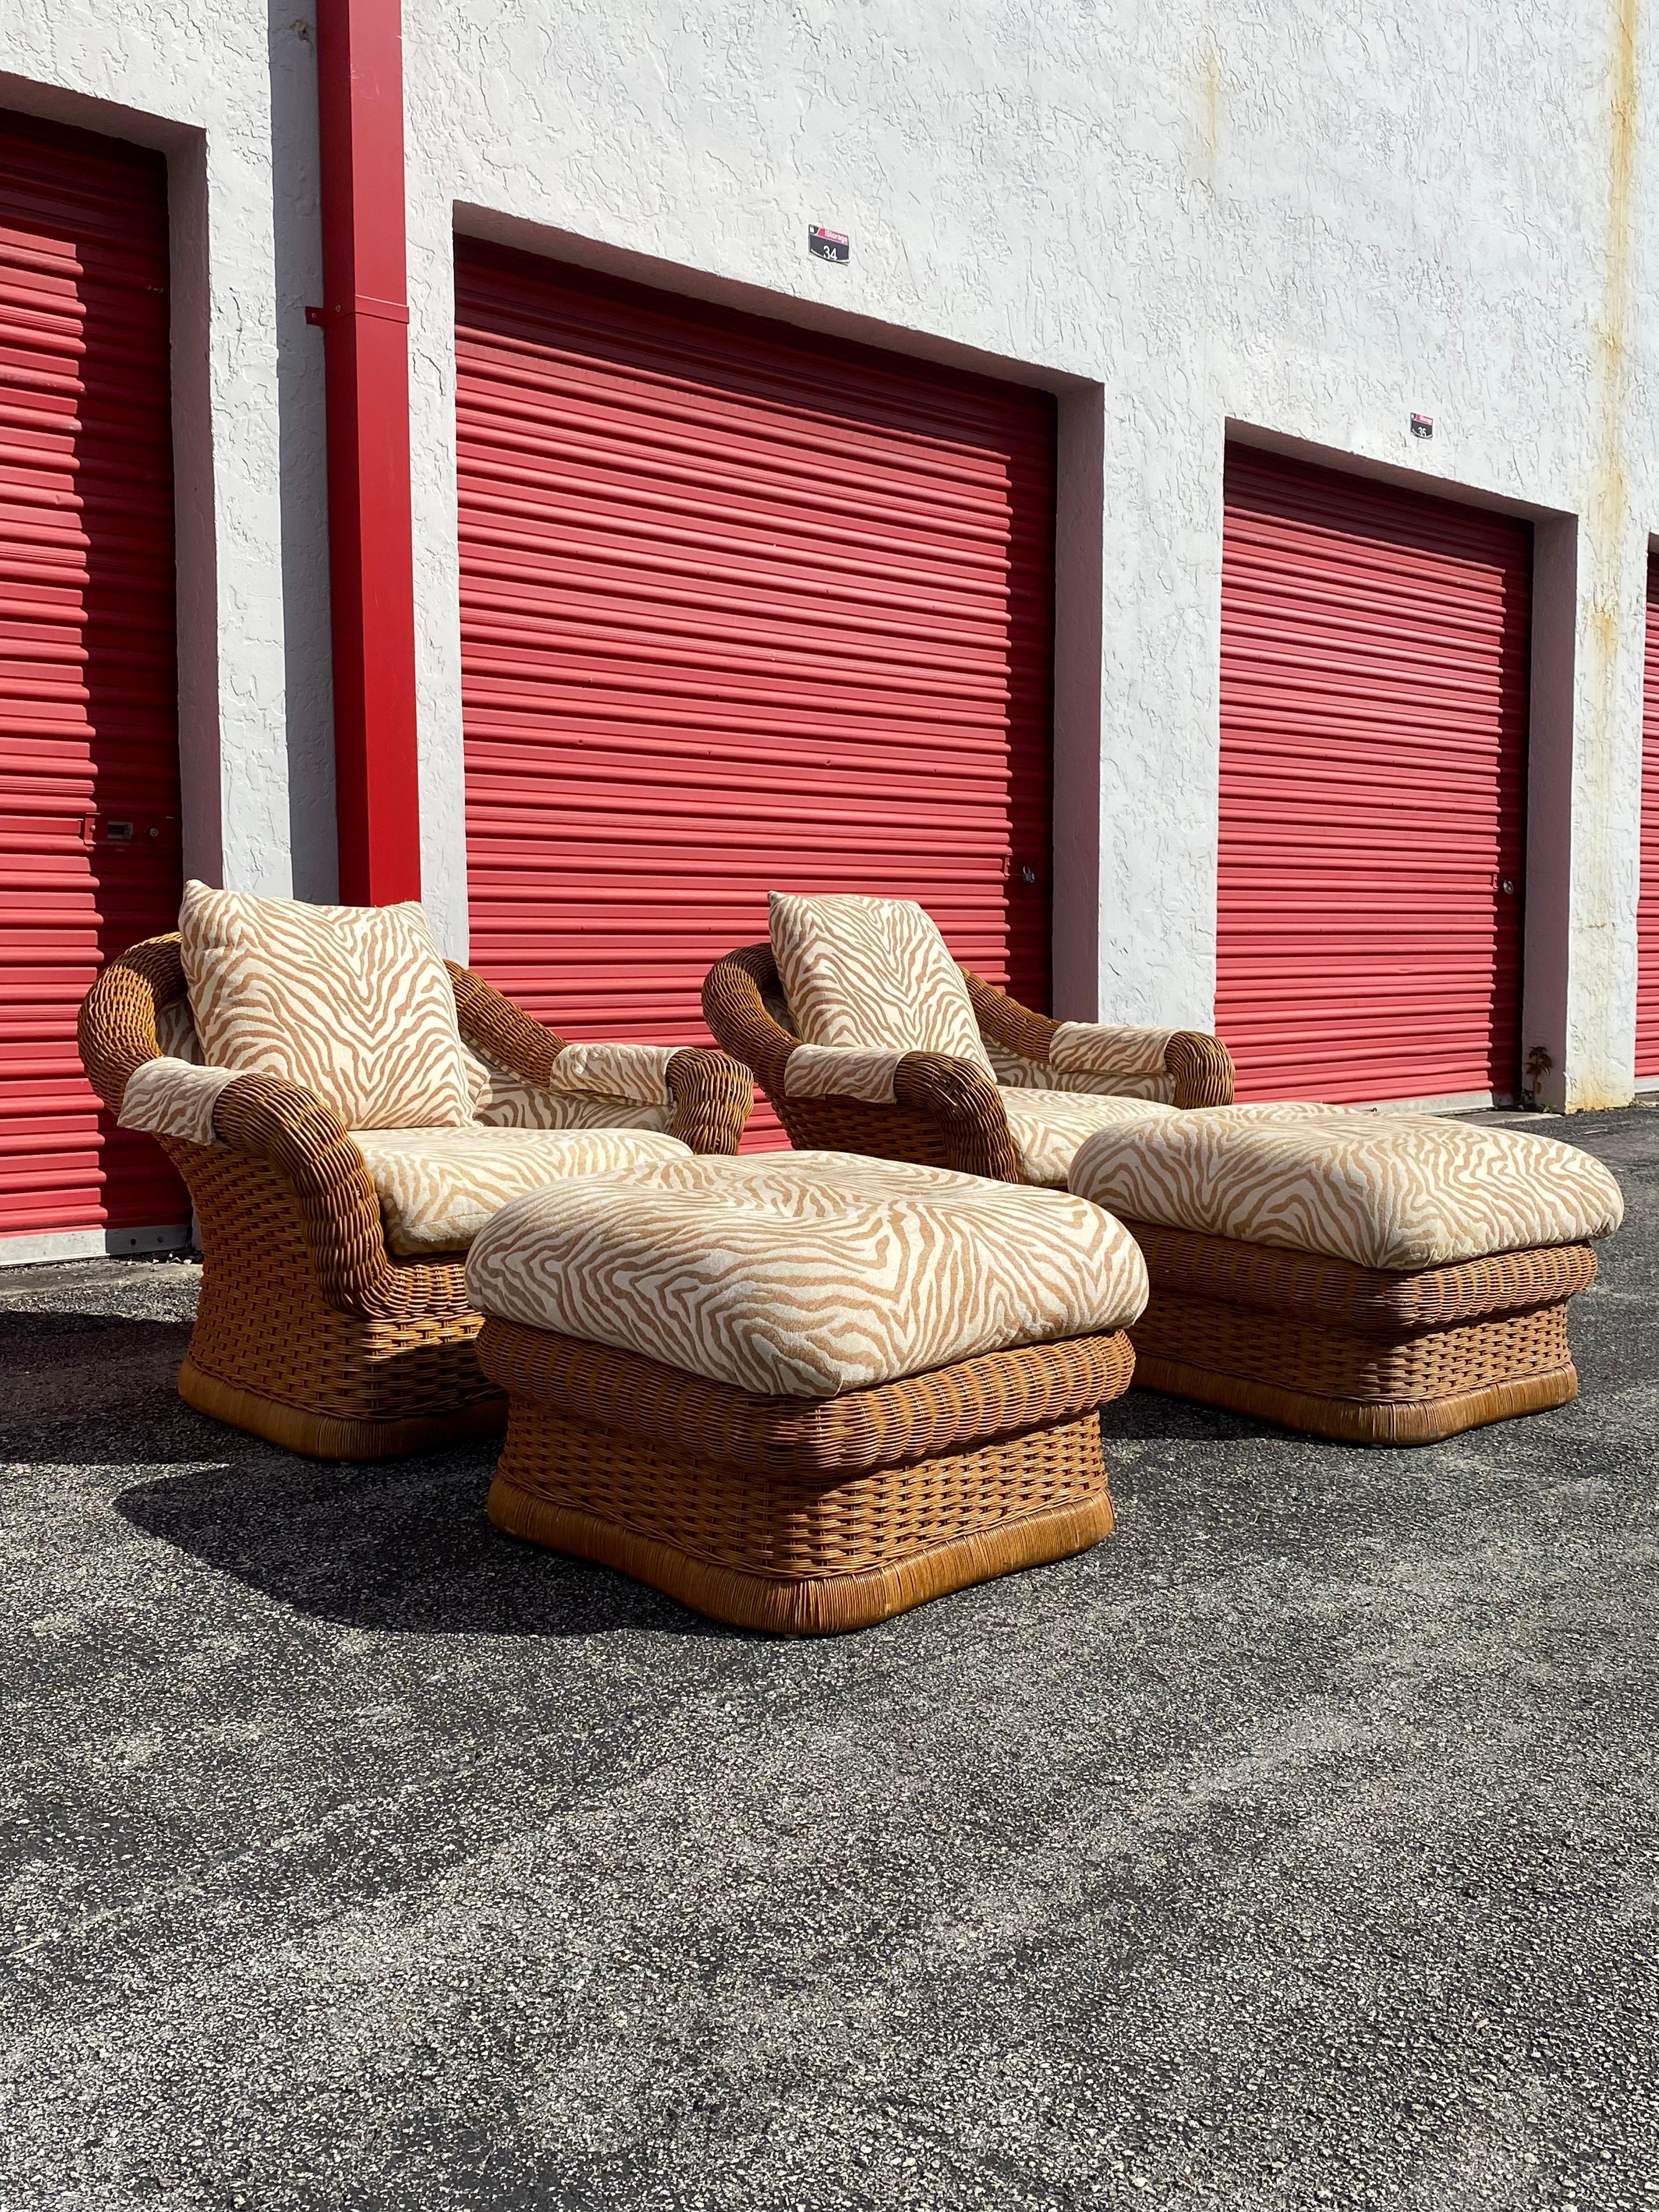 1970s Ficks Reed Woven Rattan Zebra Chairs and Ottomans, Set of 4 In Good Condition For Sale In Fort Lauderdale, FL